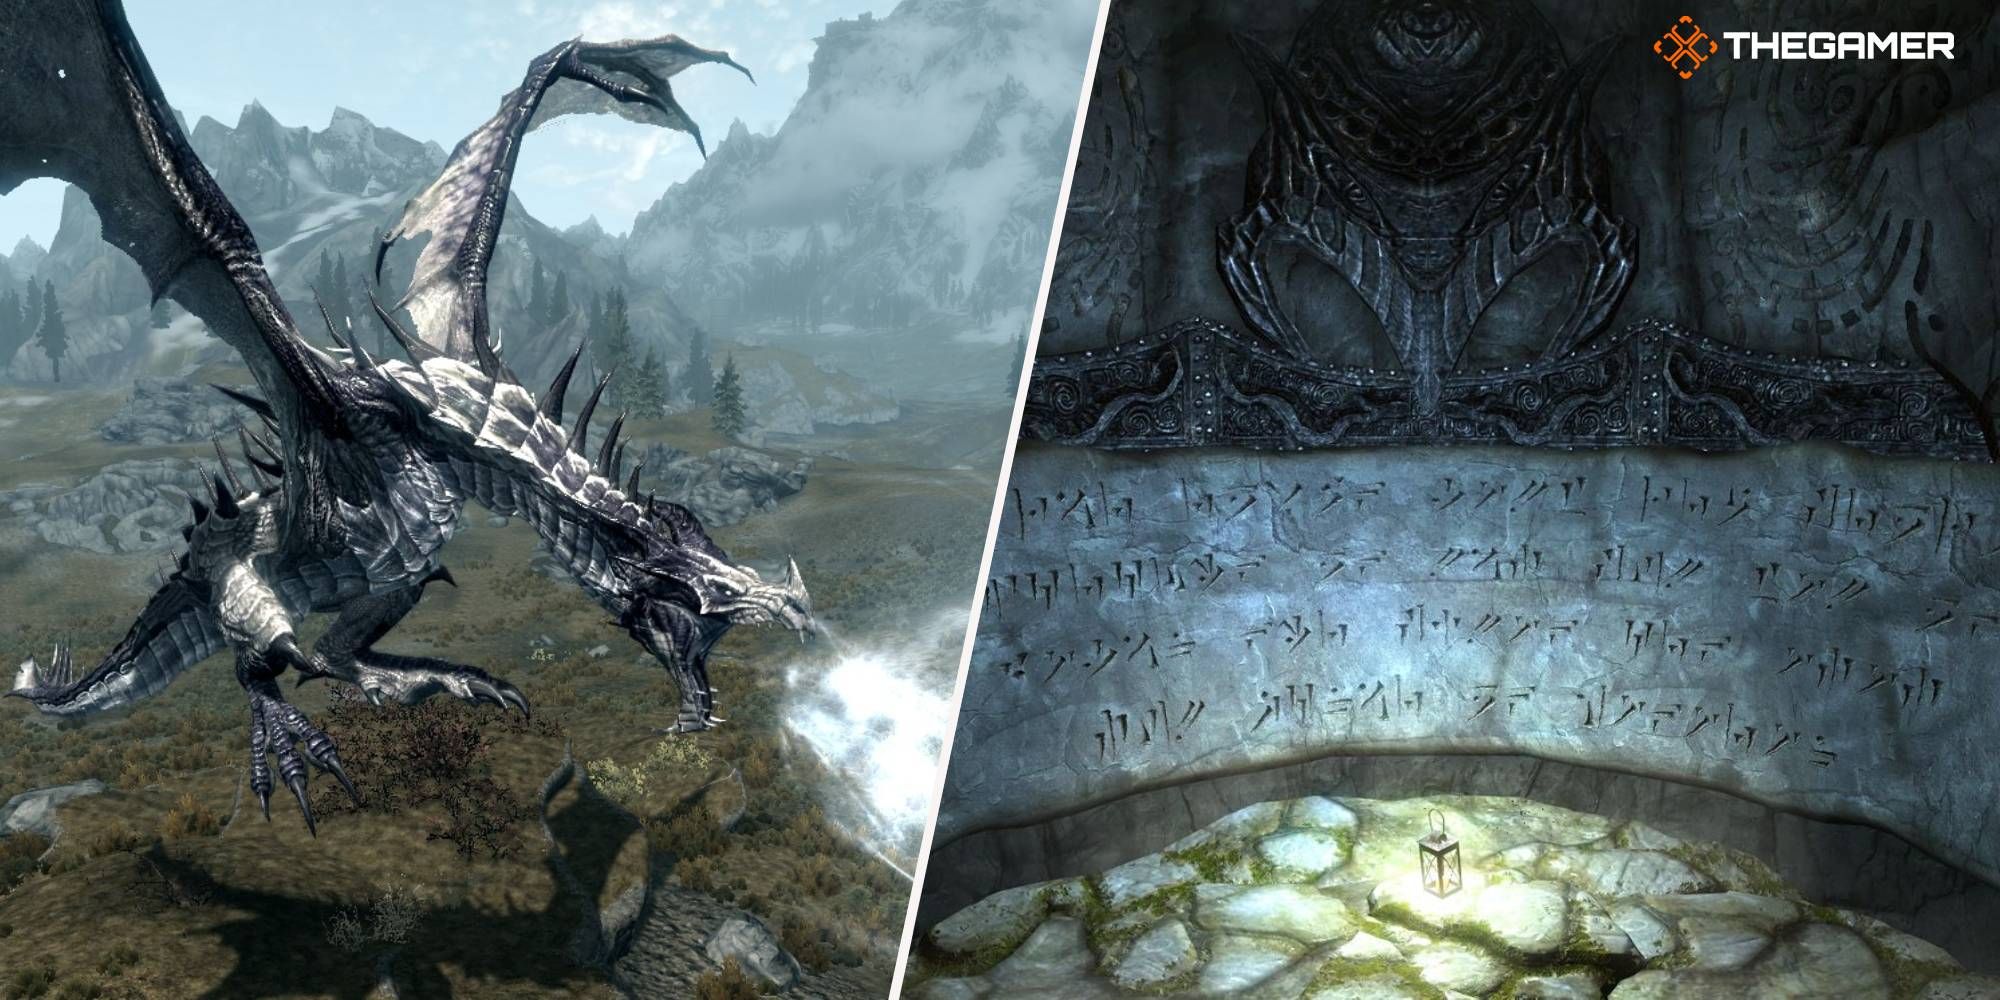 A dragon breathing frost above a lair and a Word Wall in Skyrim